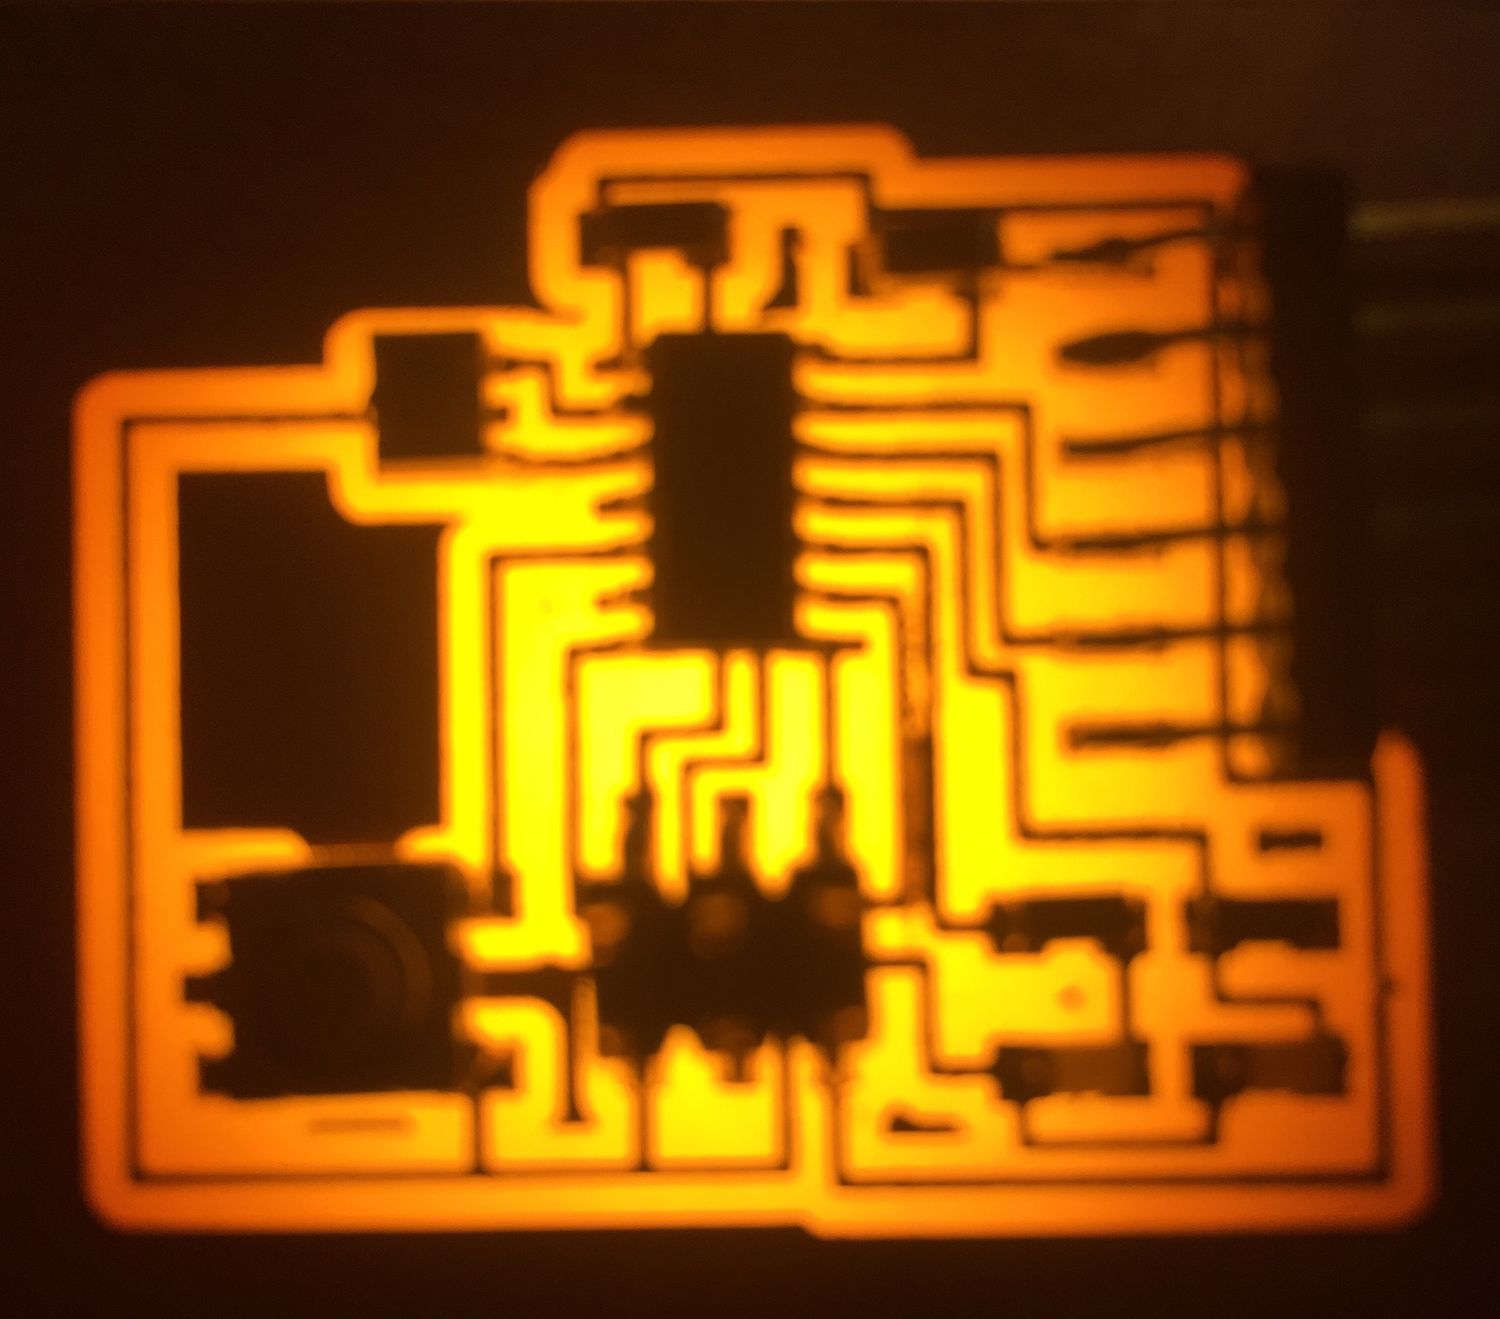 Dark circuit board image with traces lit up in orange